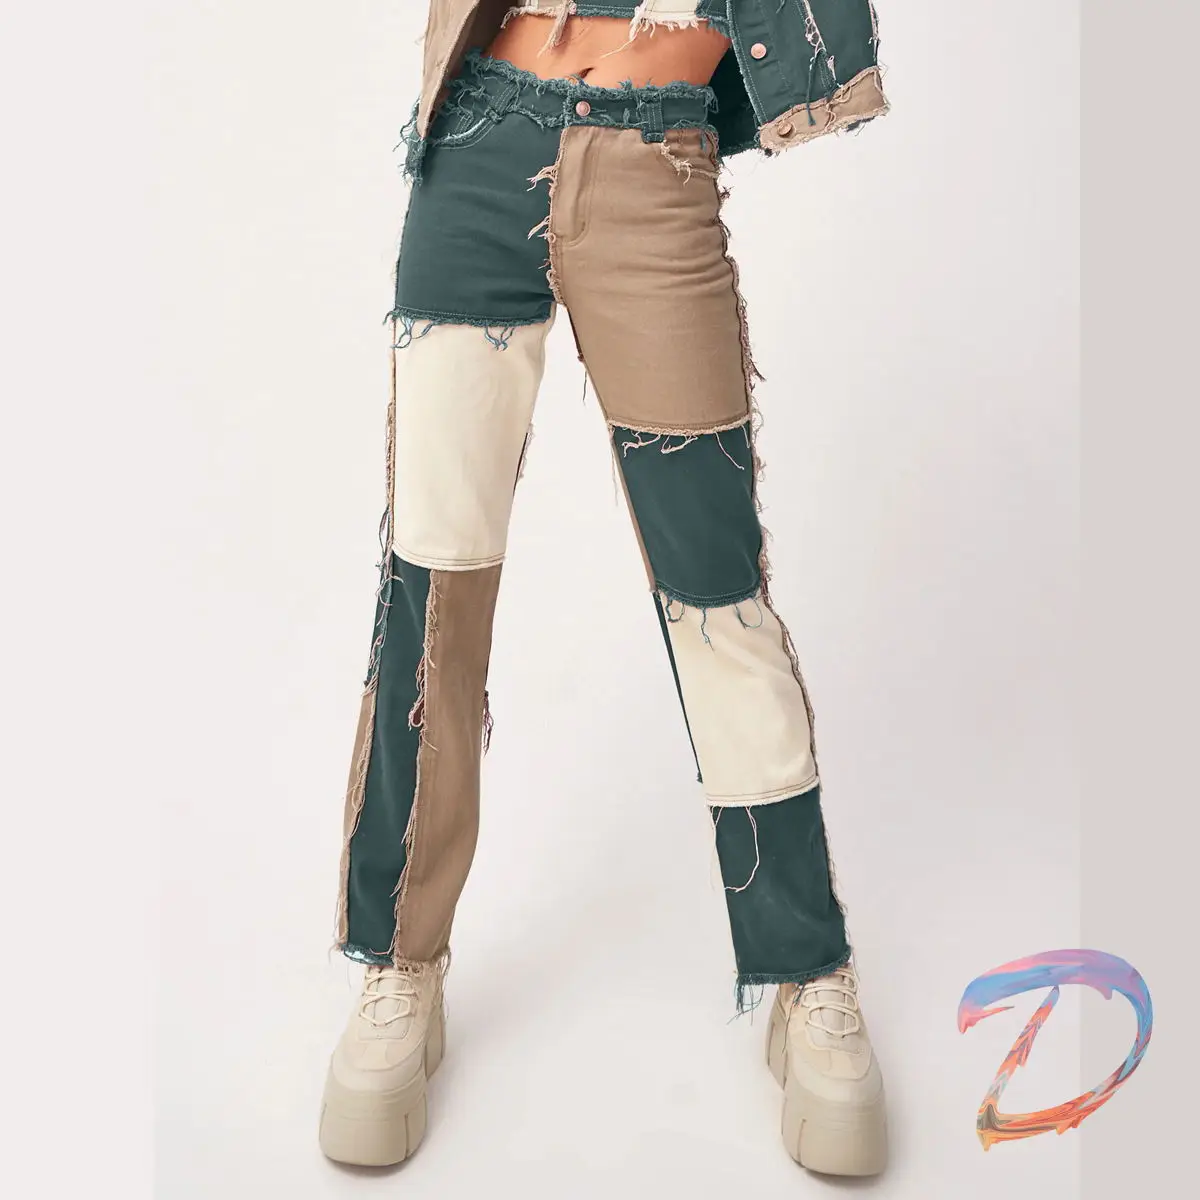 

Women's Jeans European American Trend High Quality Variegated Stitching High Waist Tight Denim Trousers Loose Female Jeans Pants